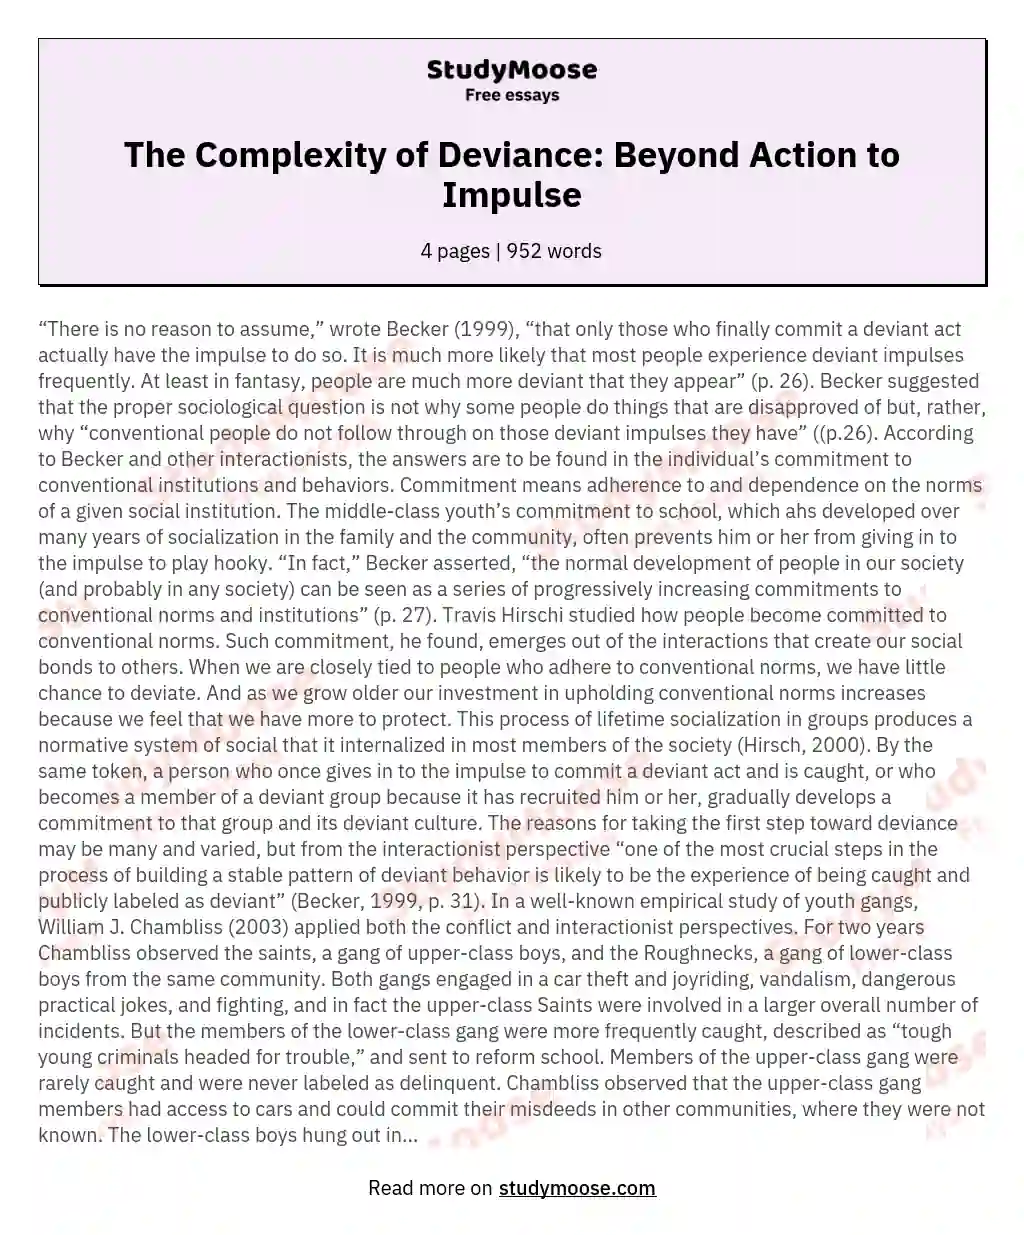 The Complexity of Deviance: Beyond Action to Impulse essay